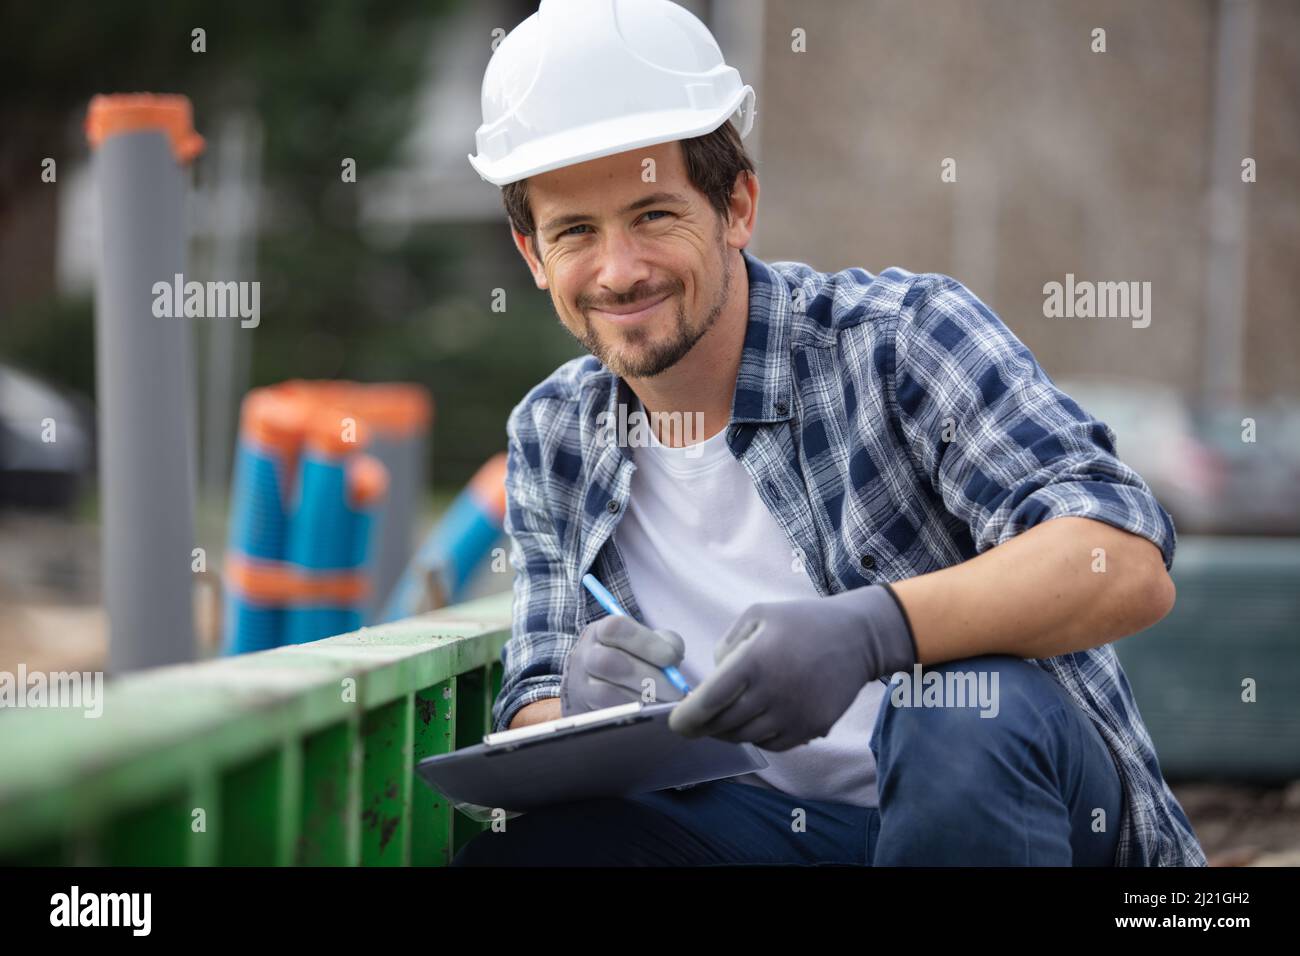 tired construction worker is thinking about perspectives Stock Photo